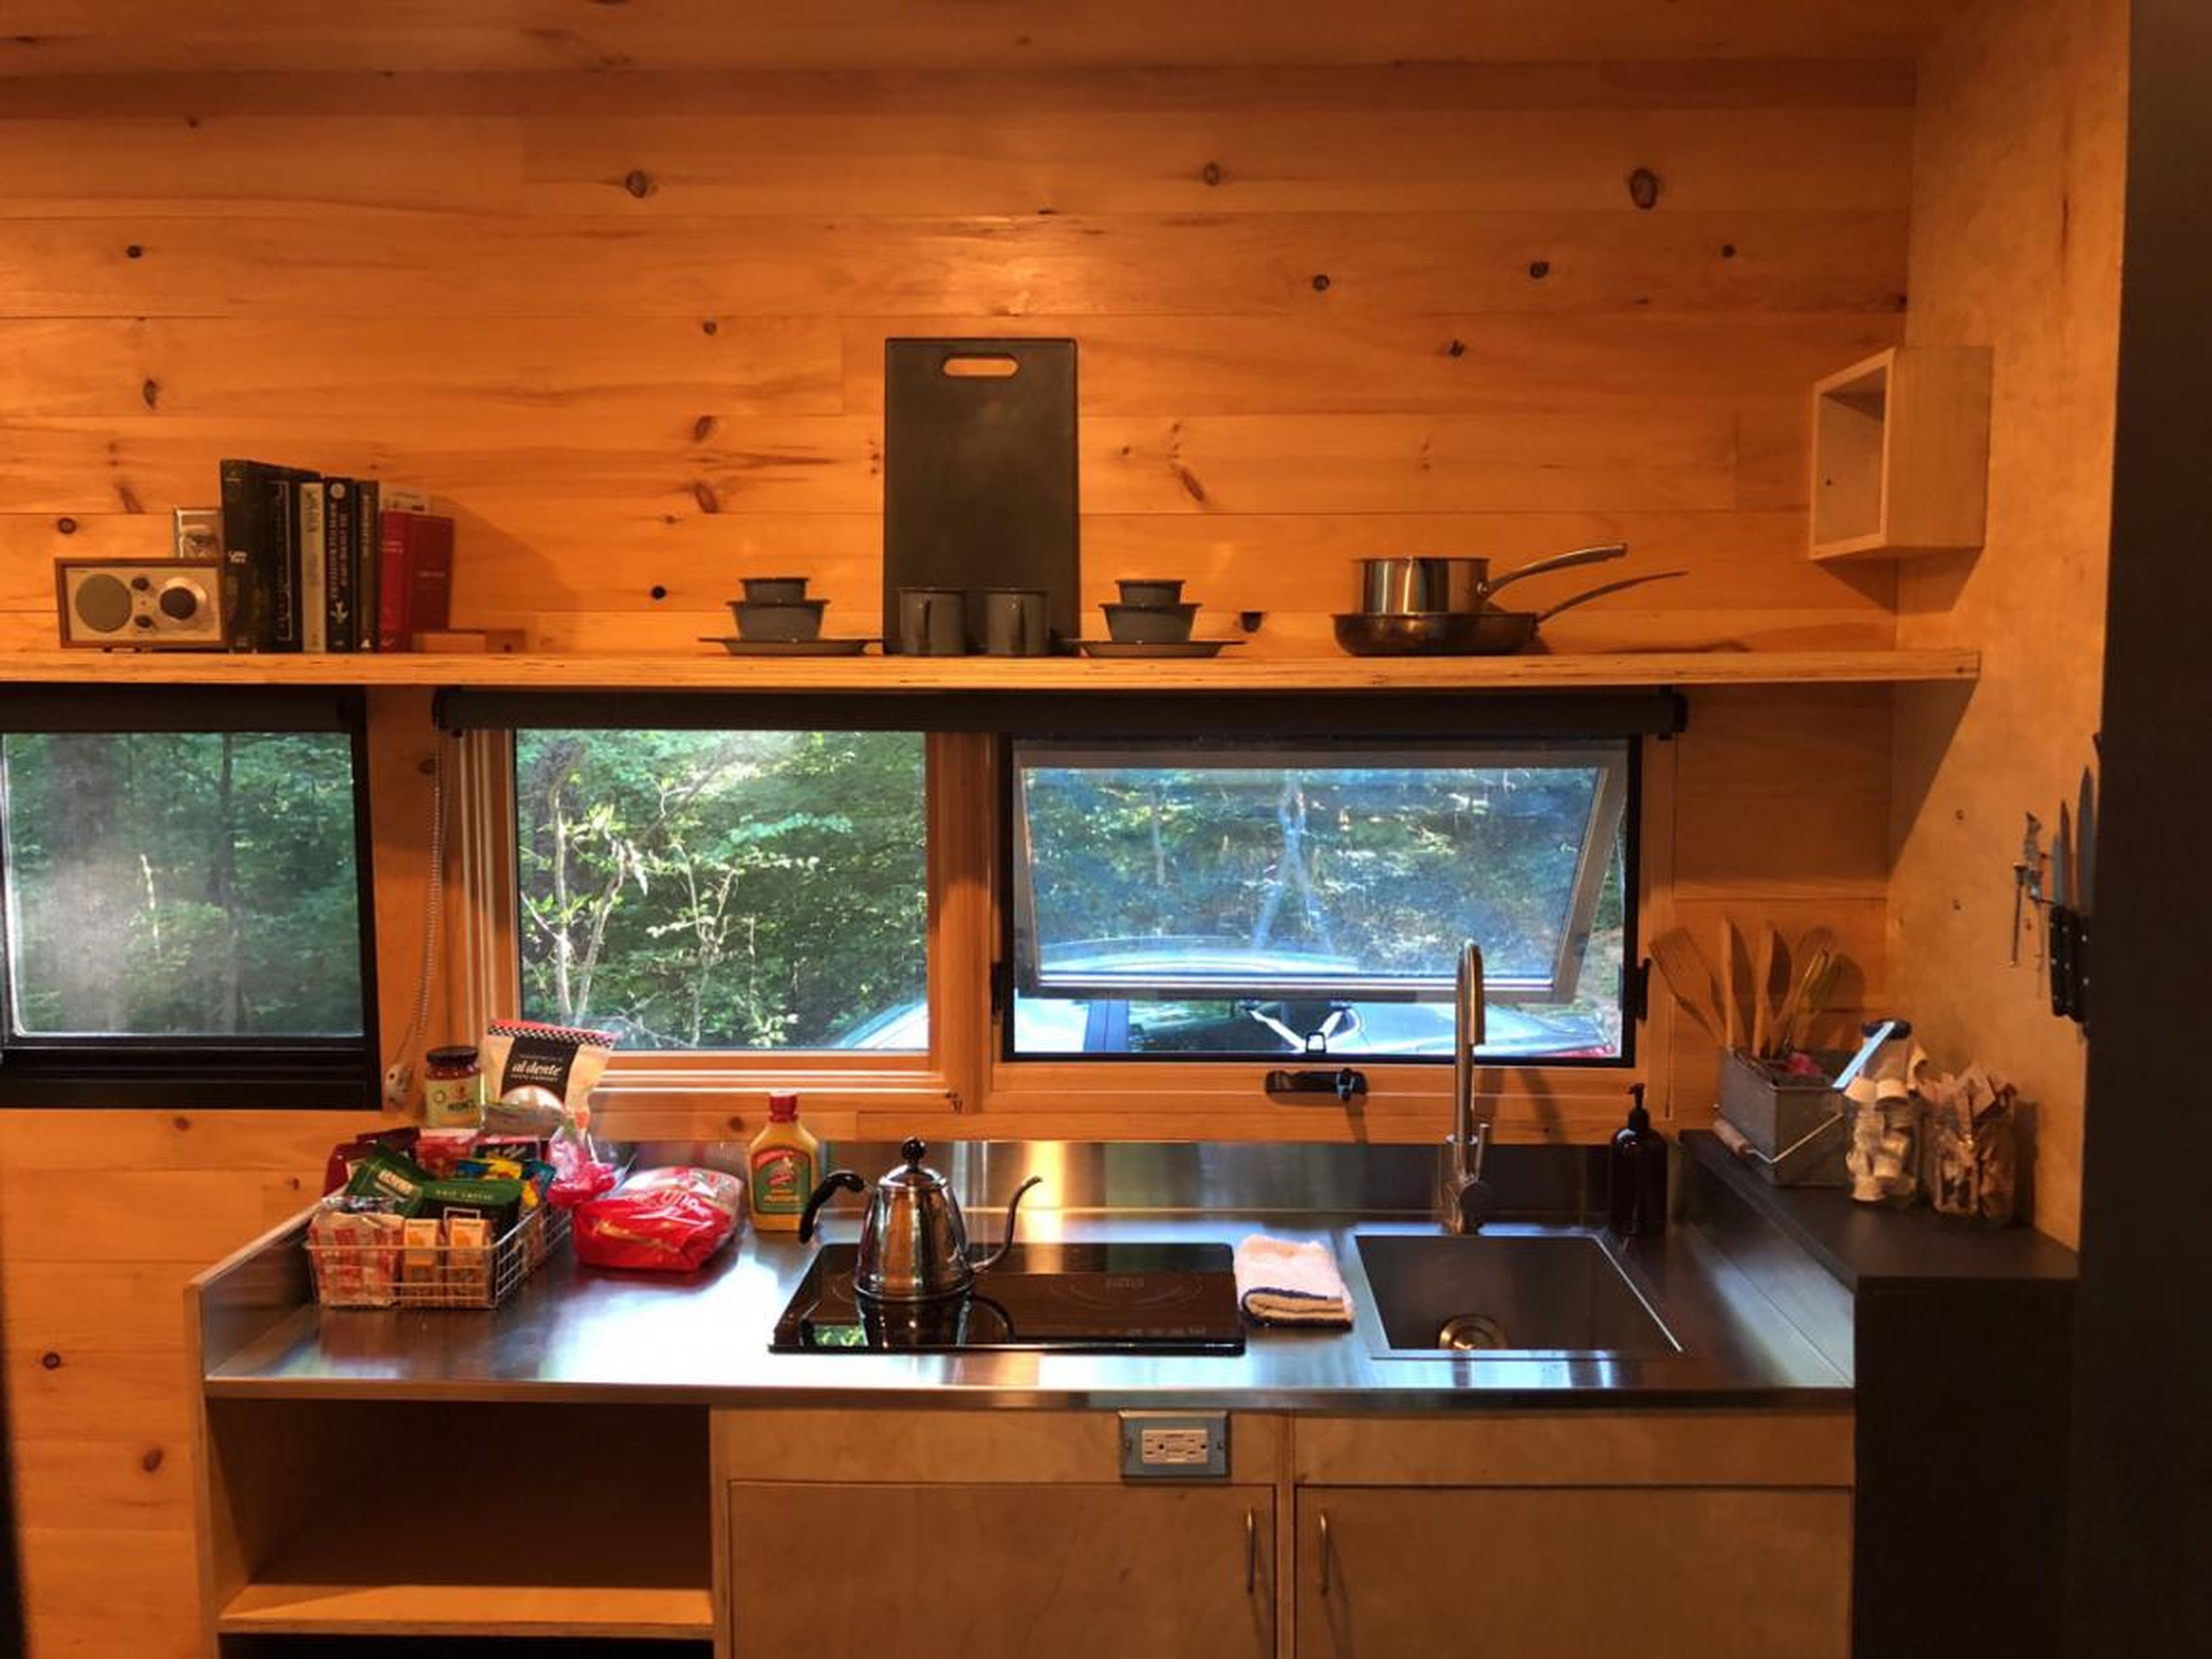 A tiny house means you'll no longer have a full kitchen — a mini fridge and lack of counter space can be a problem if you like to cook. "I see tiny houses with mini-fridges and a two-burner stove top with no oven," Justin, a Tiny